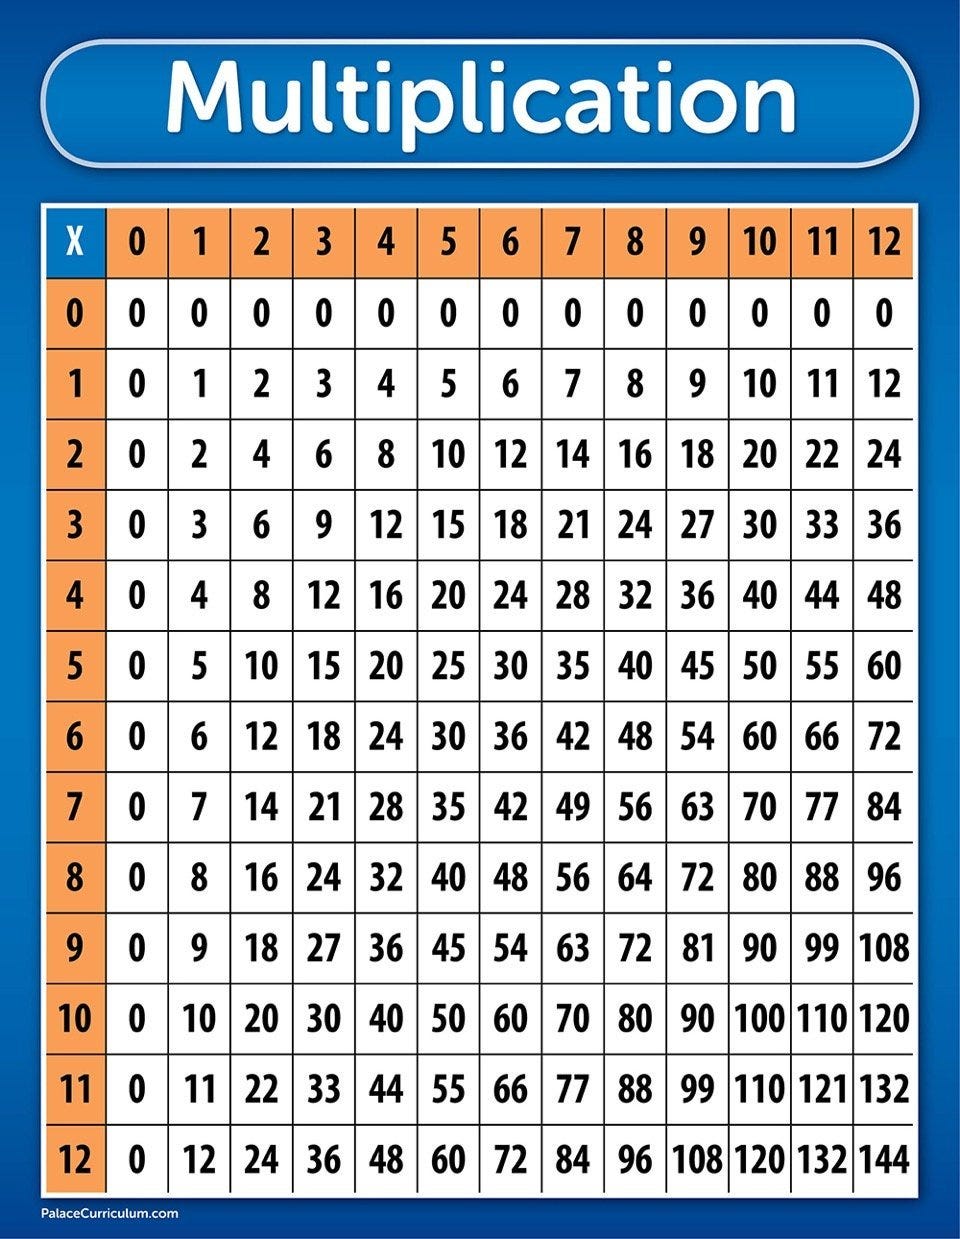 a new style of multiplication tables, by Dave